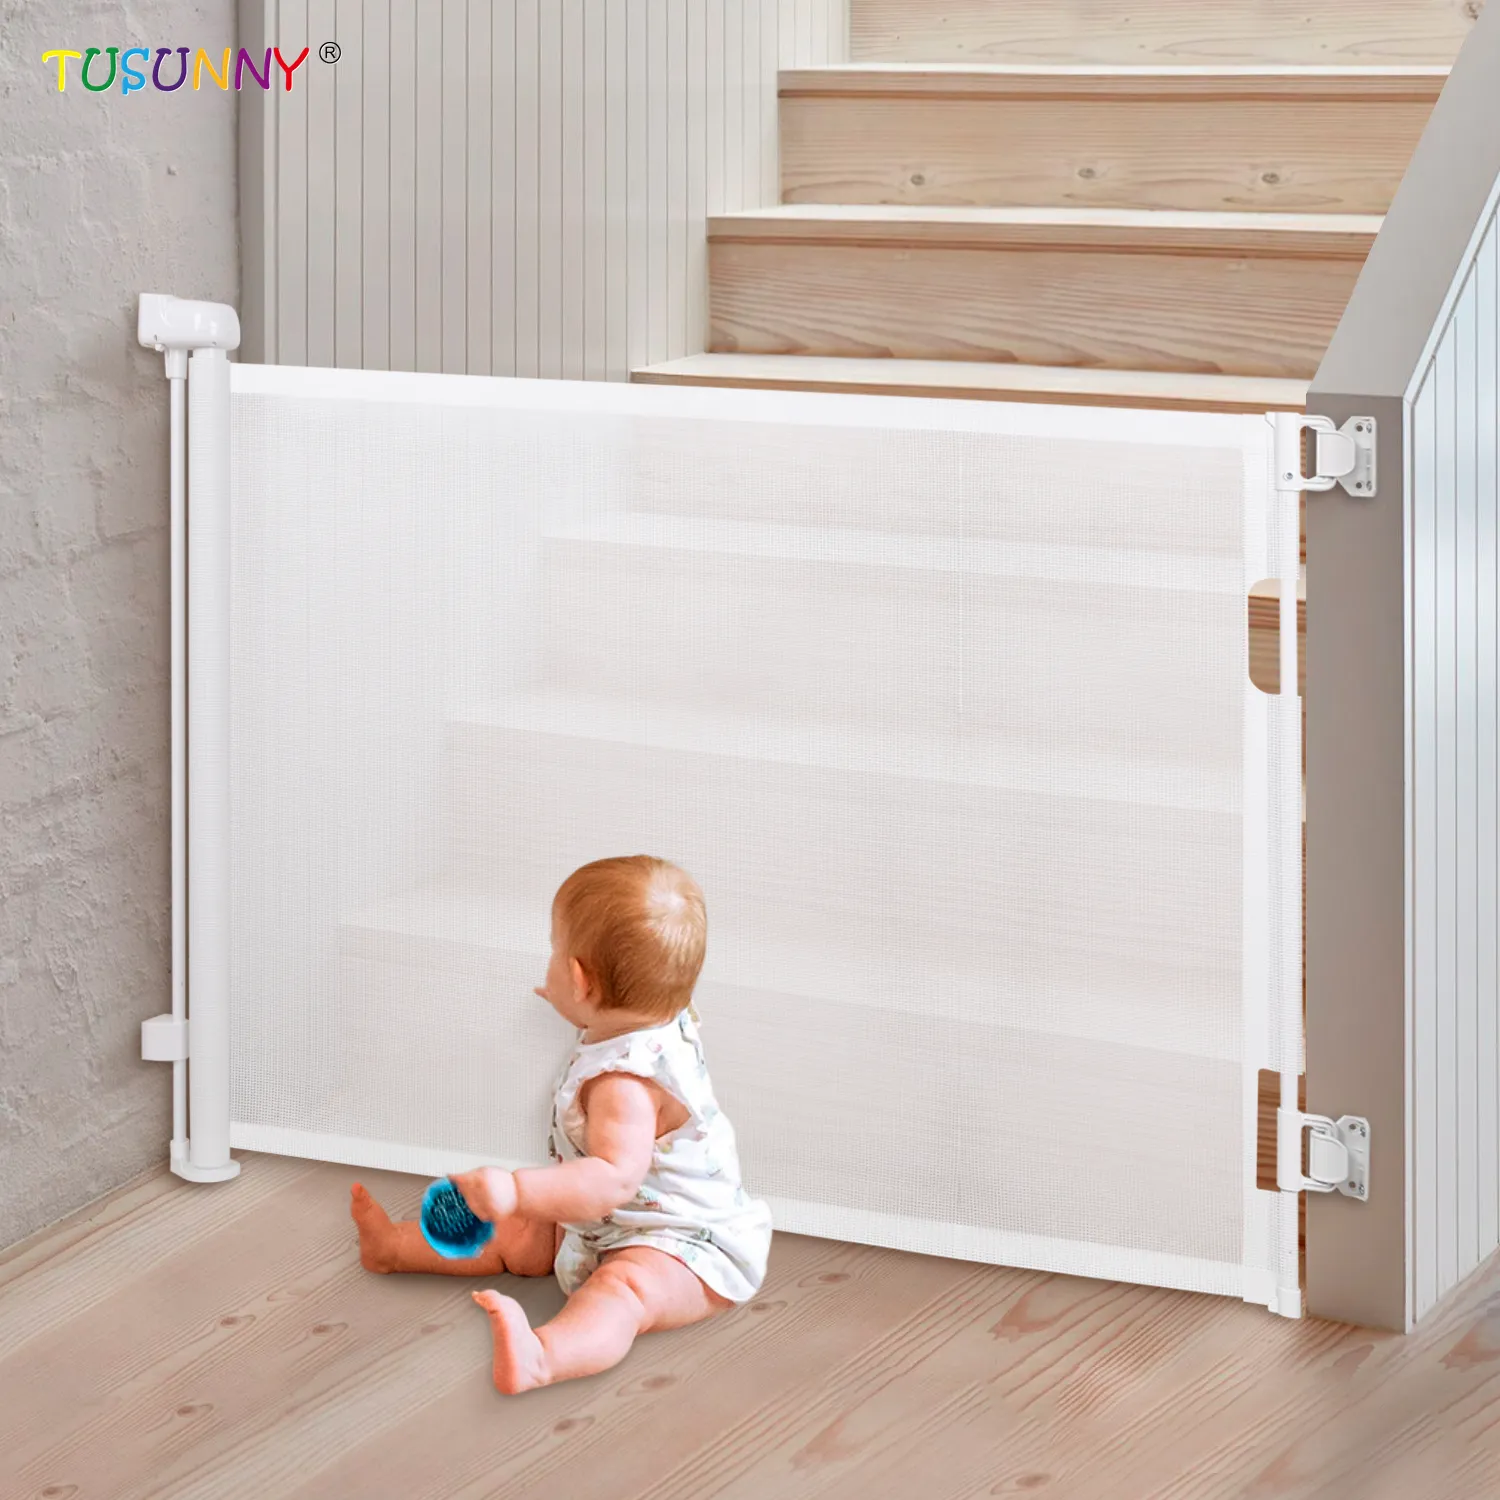 Retractable Baby Gate  33" Tall Baby Gates Extra Wide  Mesh Gates For Kids Or Pets Durable Child Safety Gate For Doorways Stairs